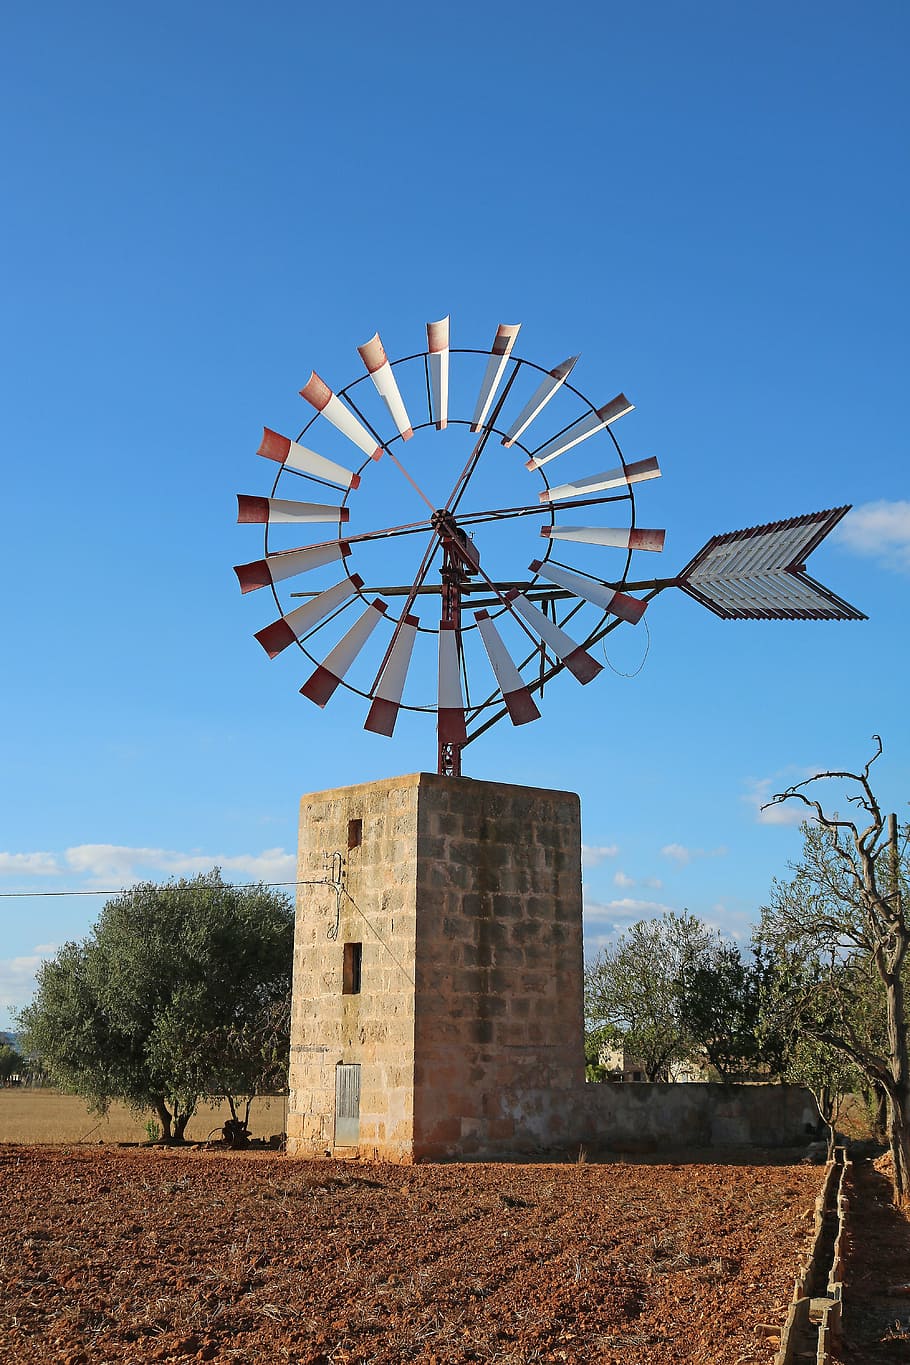 mallorca, windmill, old mill, windräder, traditionally, agriculture, old, nostalgia, sky, renewable energy